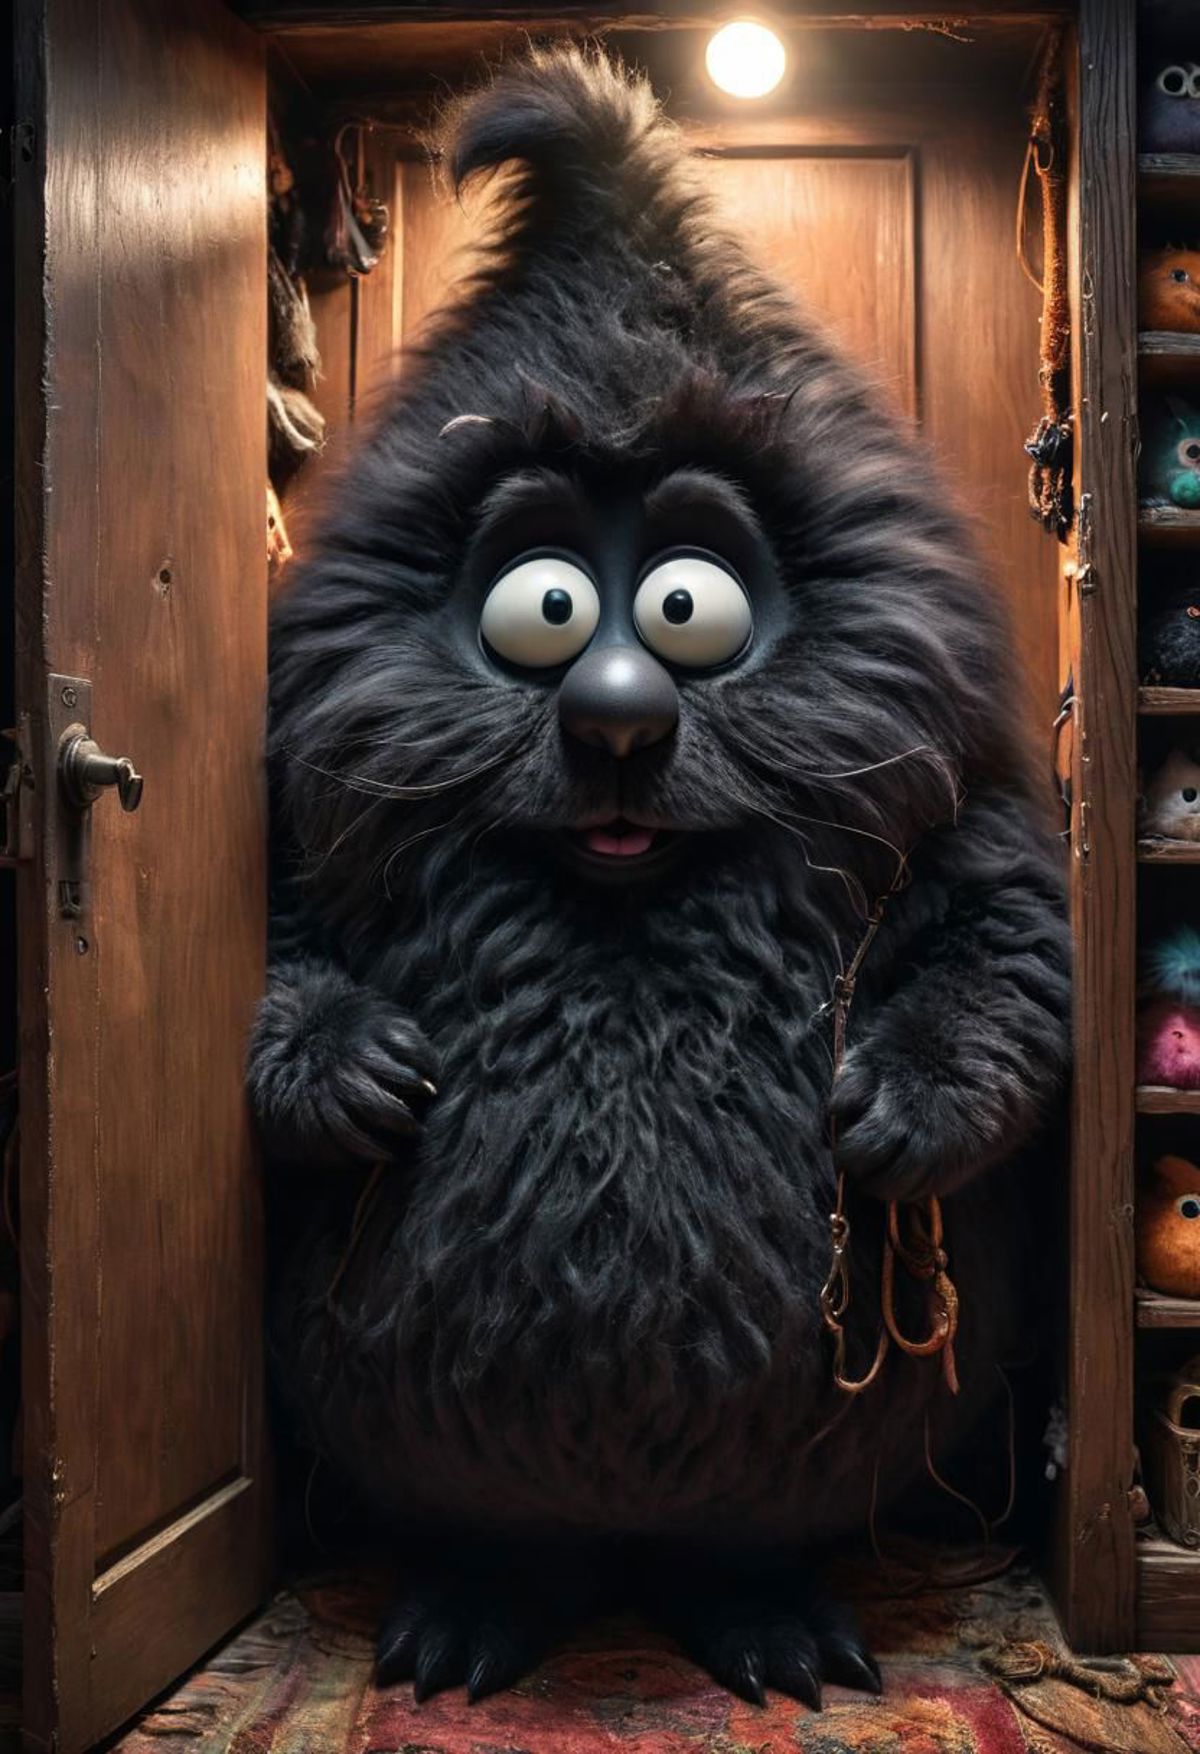 A monster character with a big mouth and eyes standing in a wooden cabinet.